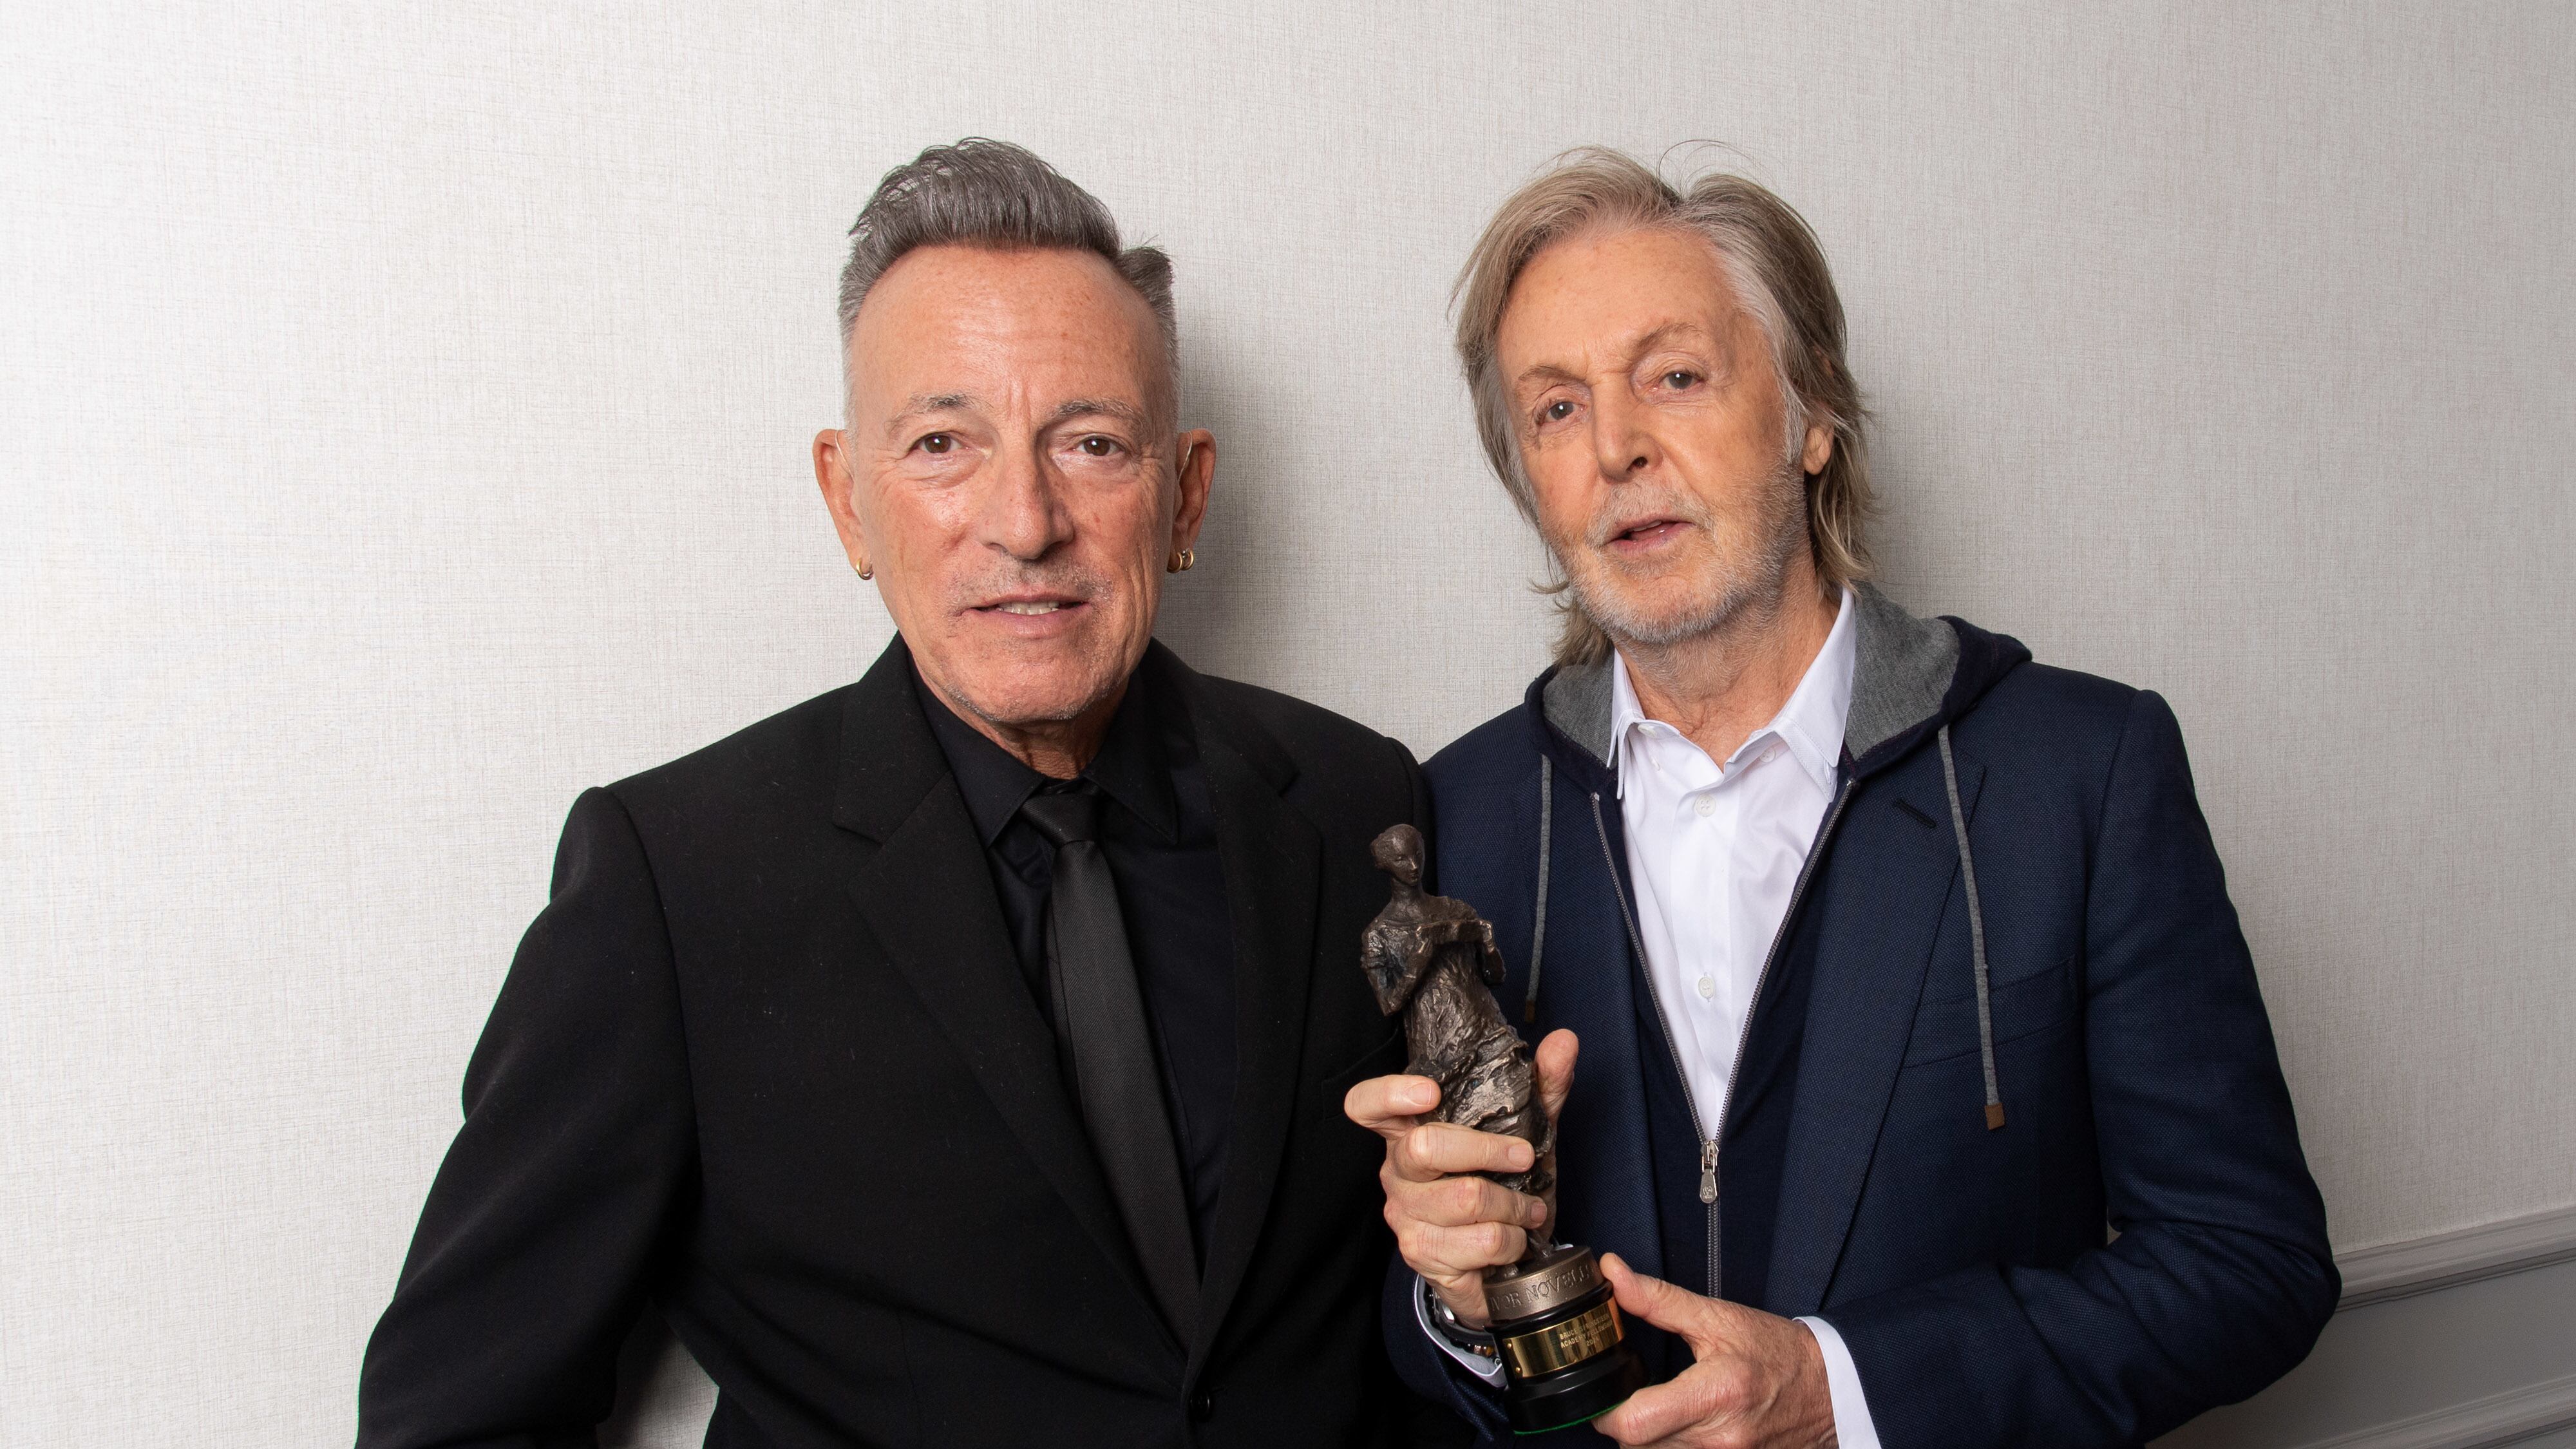 Bruce Springsteen (left) who was presented a Fellowship of The Ivors Academy by Sir Paul McCartney (right) at the Ivor Novello Awards 2024